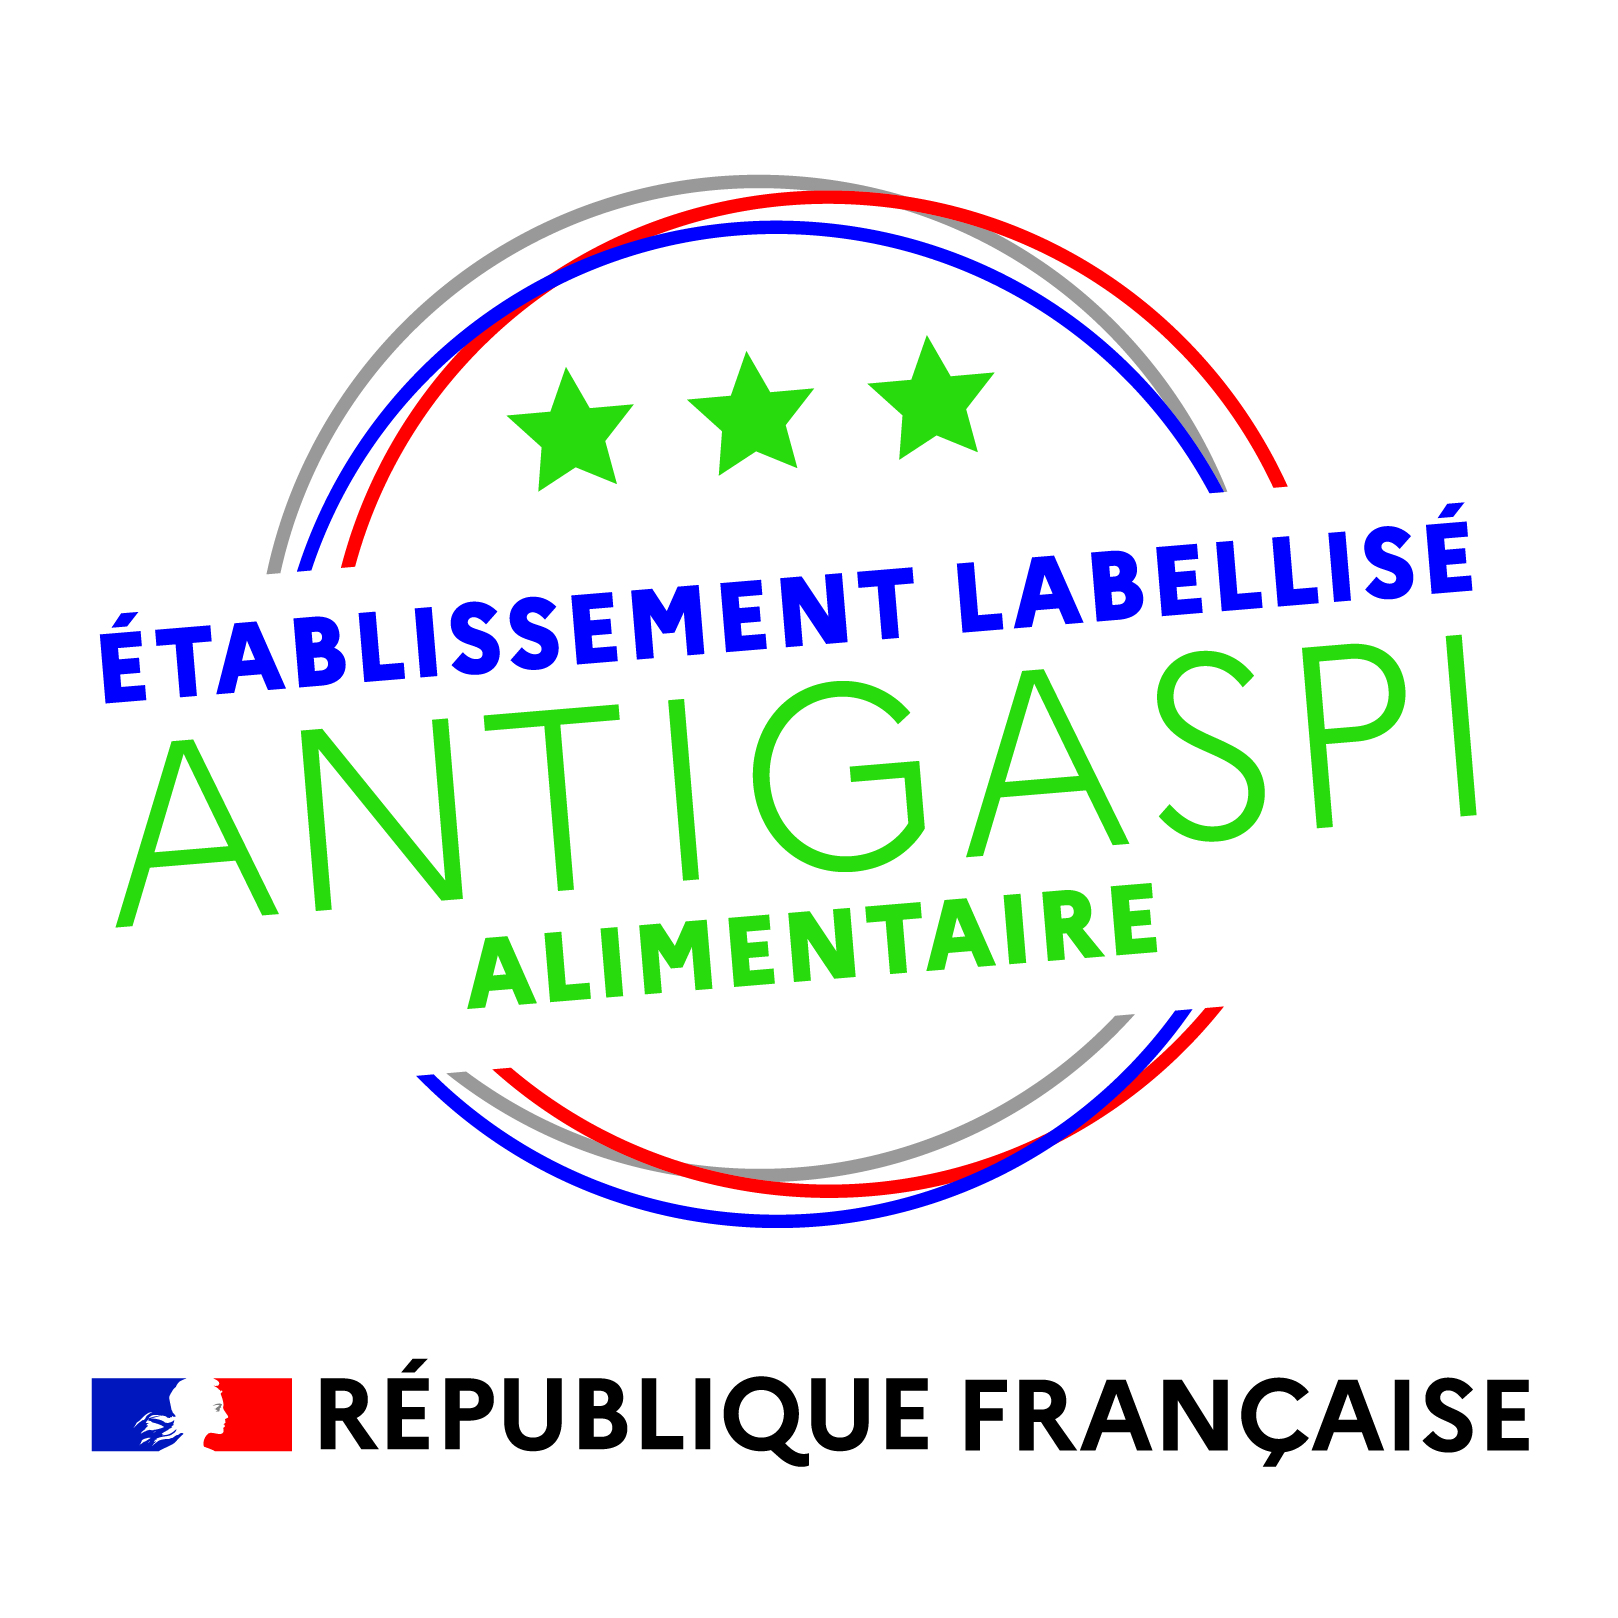 Le logo anti-gaspillage alimentaire<br>